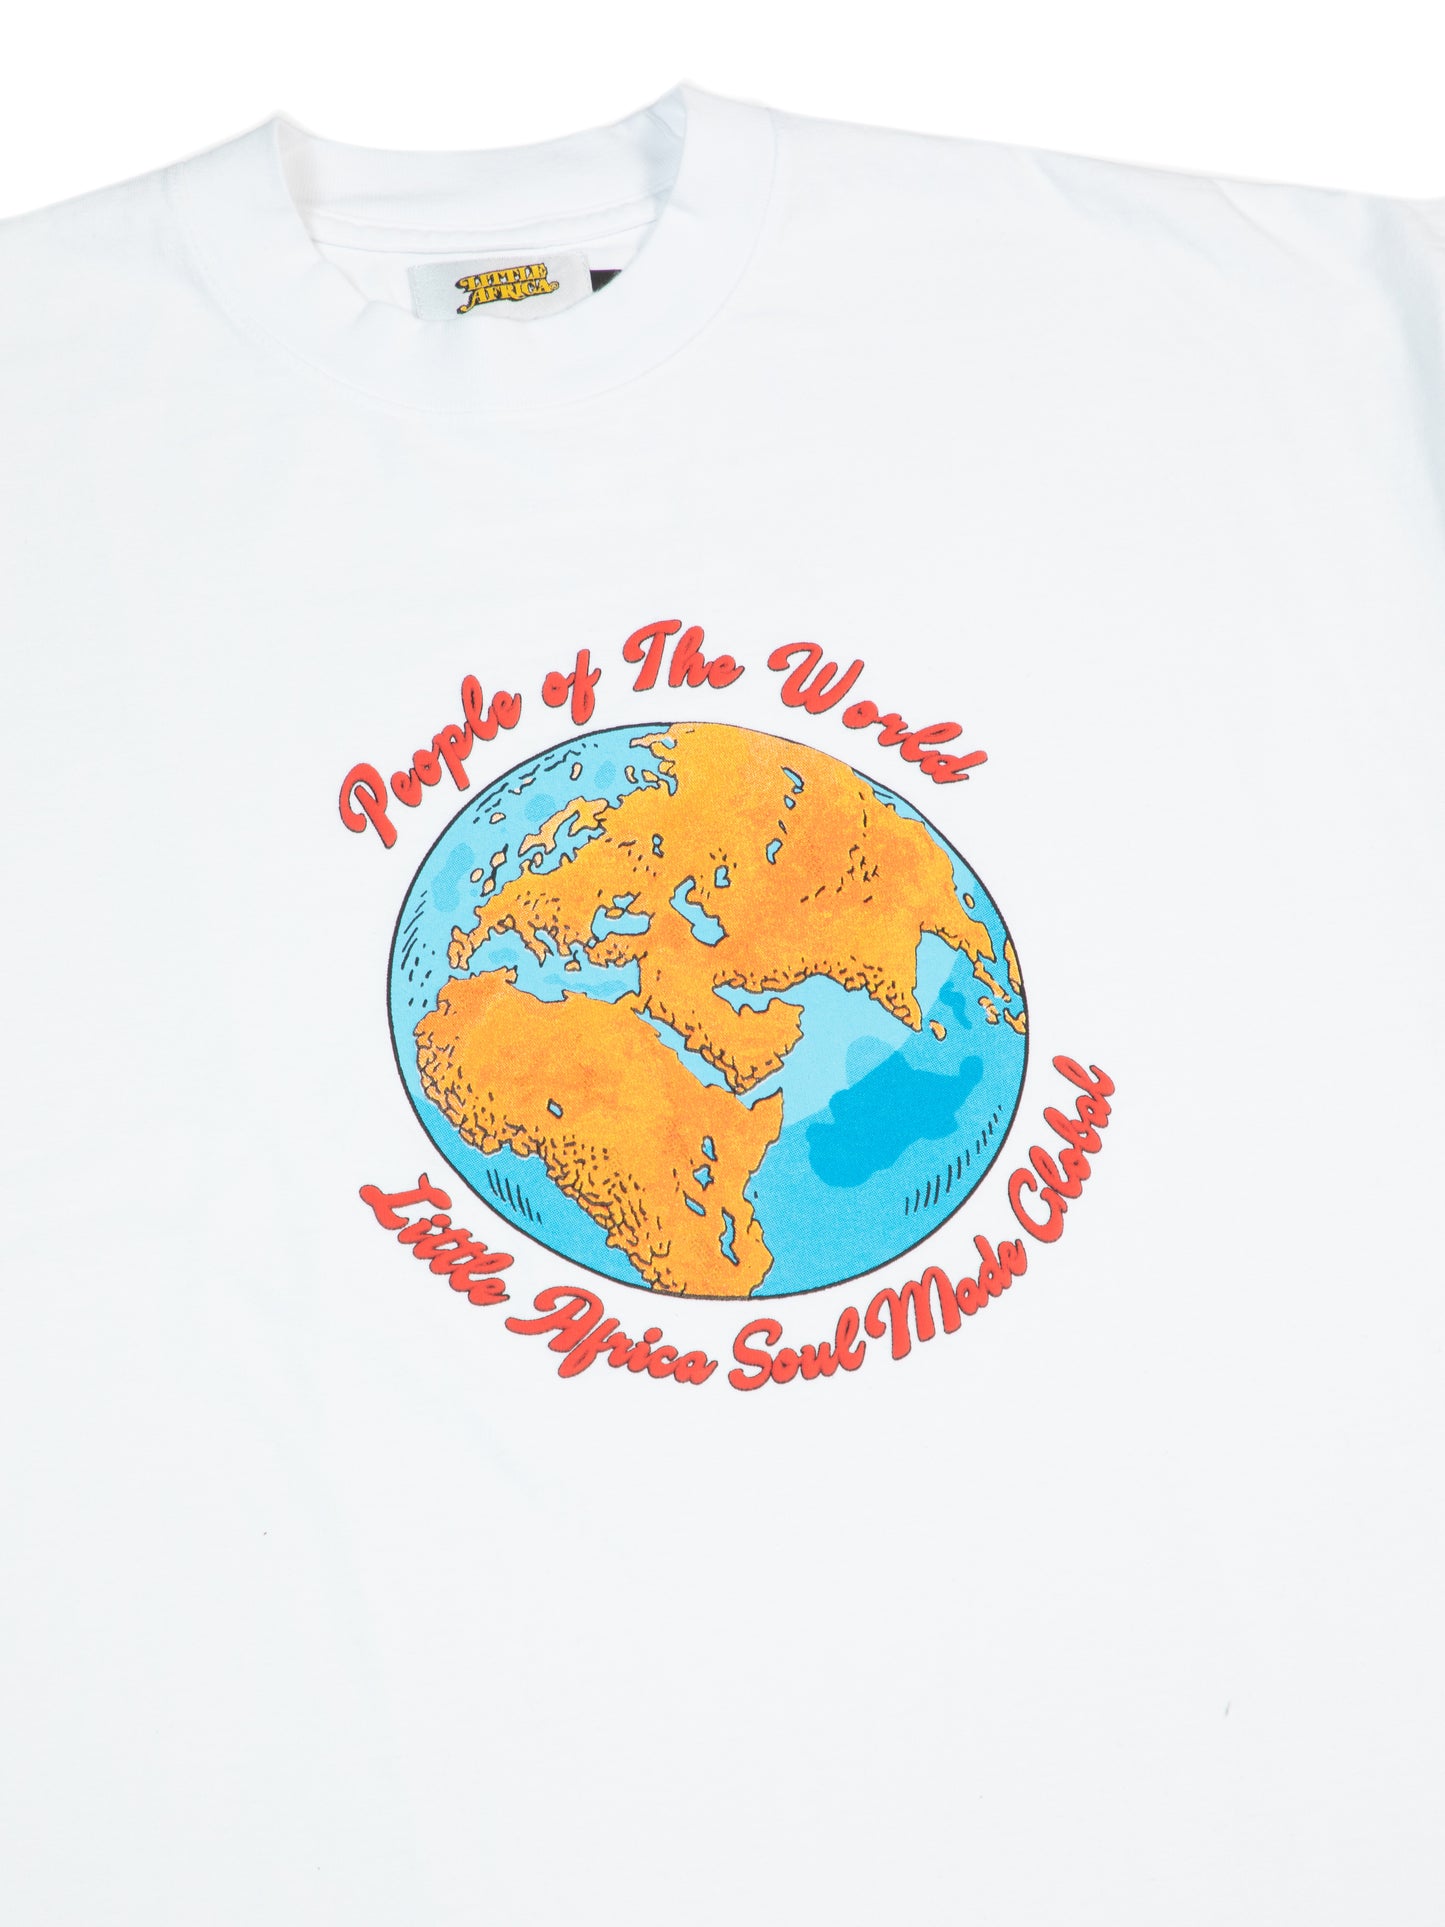 LITTLE AFRICA "People of The World Tee" (White)